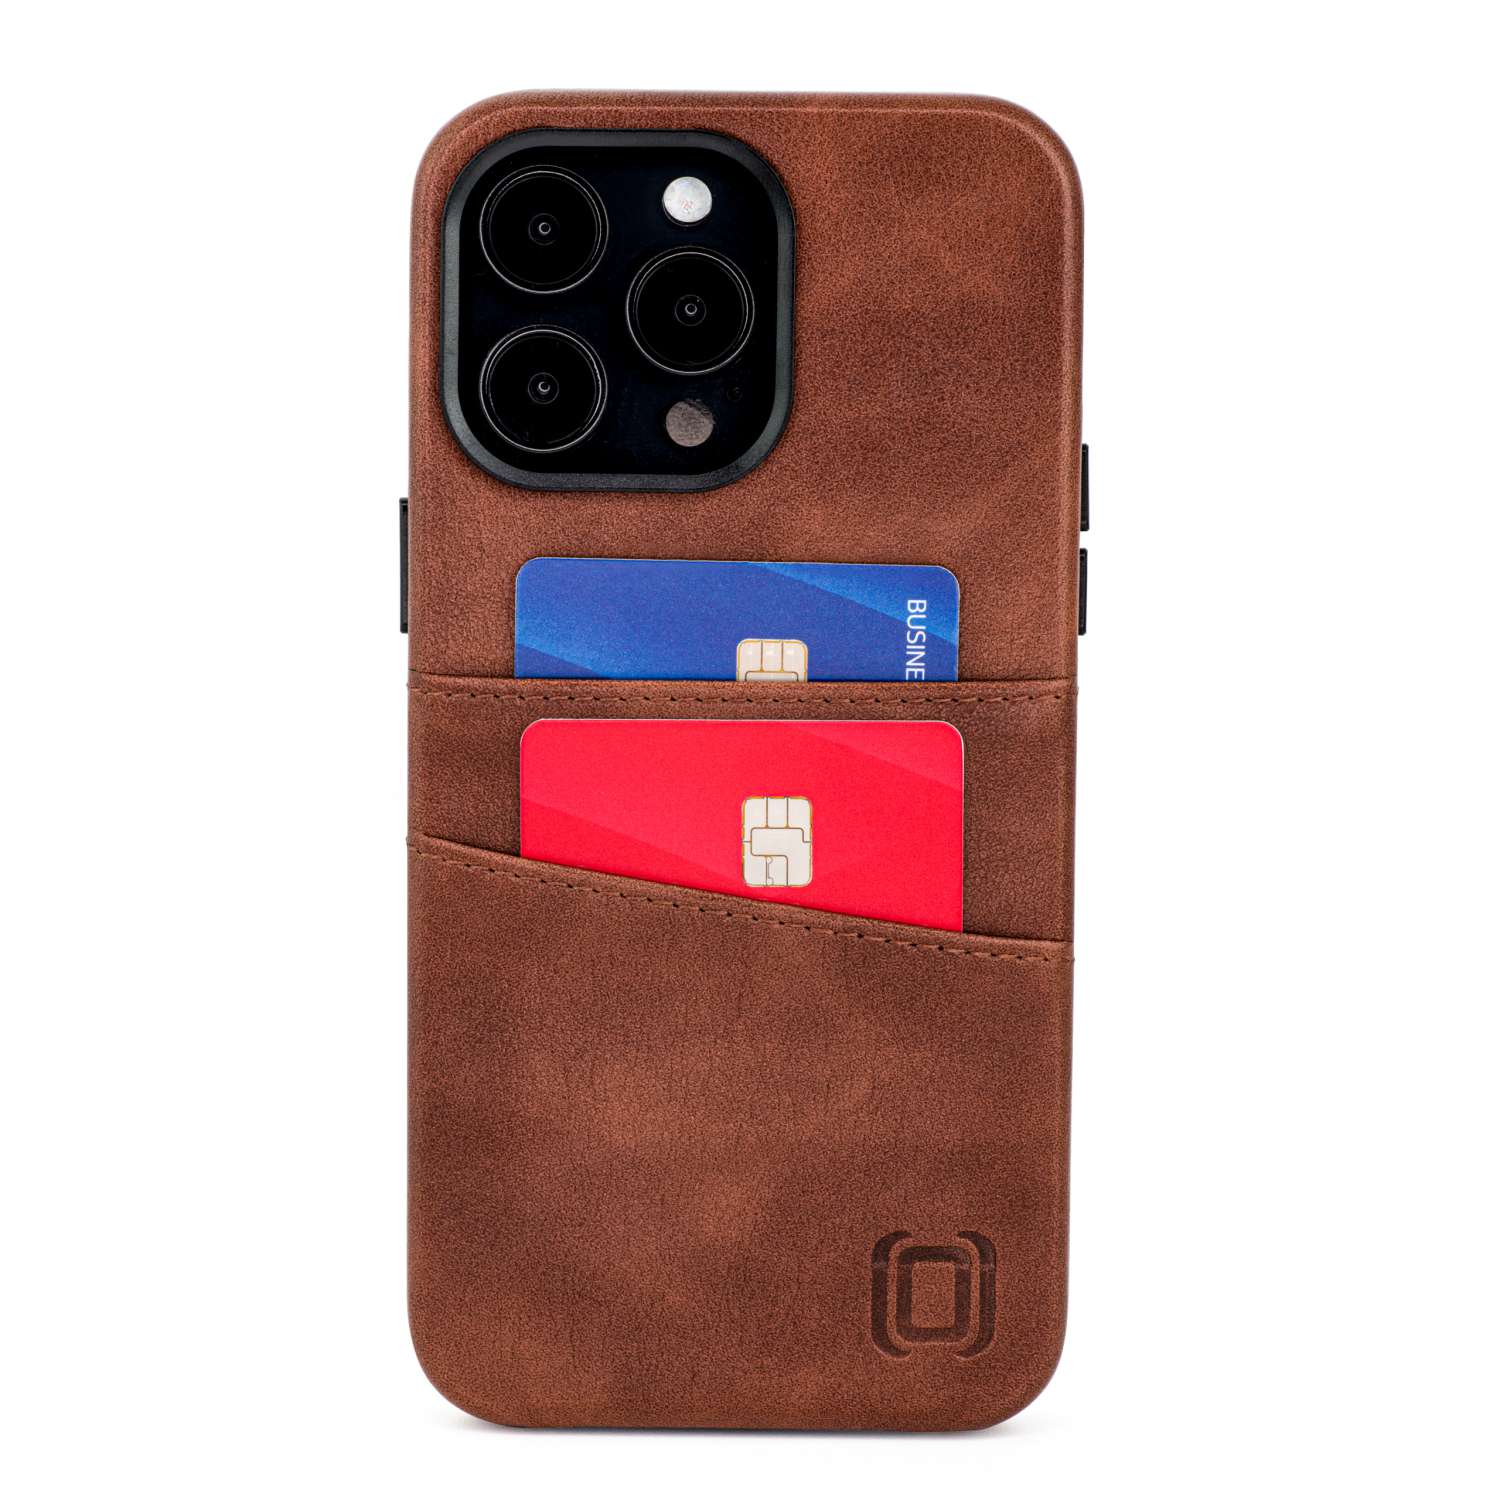 Dockem Card Case for iPhone 14 Pro Max with Built-in Metal Plate for Magnetic Mounting & 2 Pockets: Exec M2 (Brown)